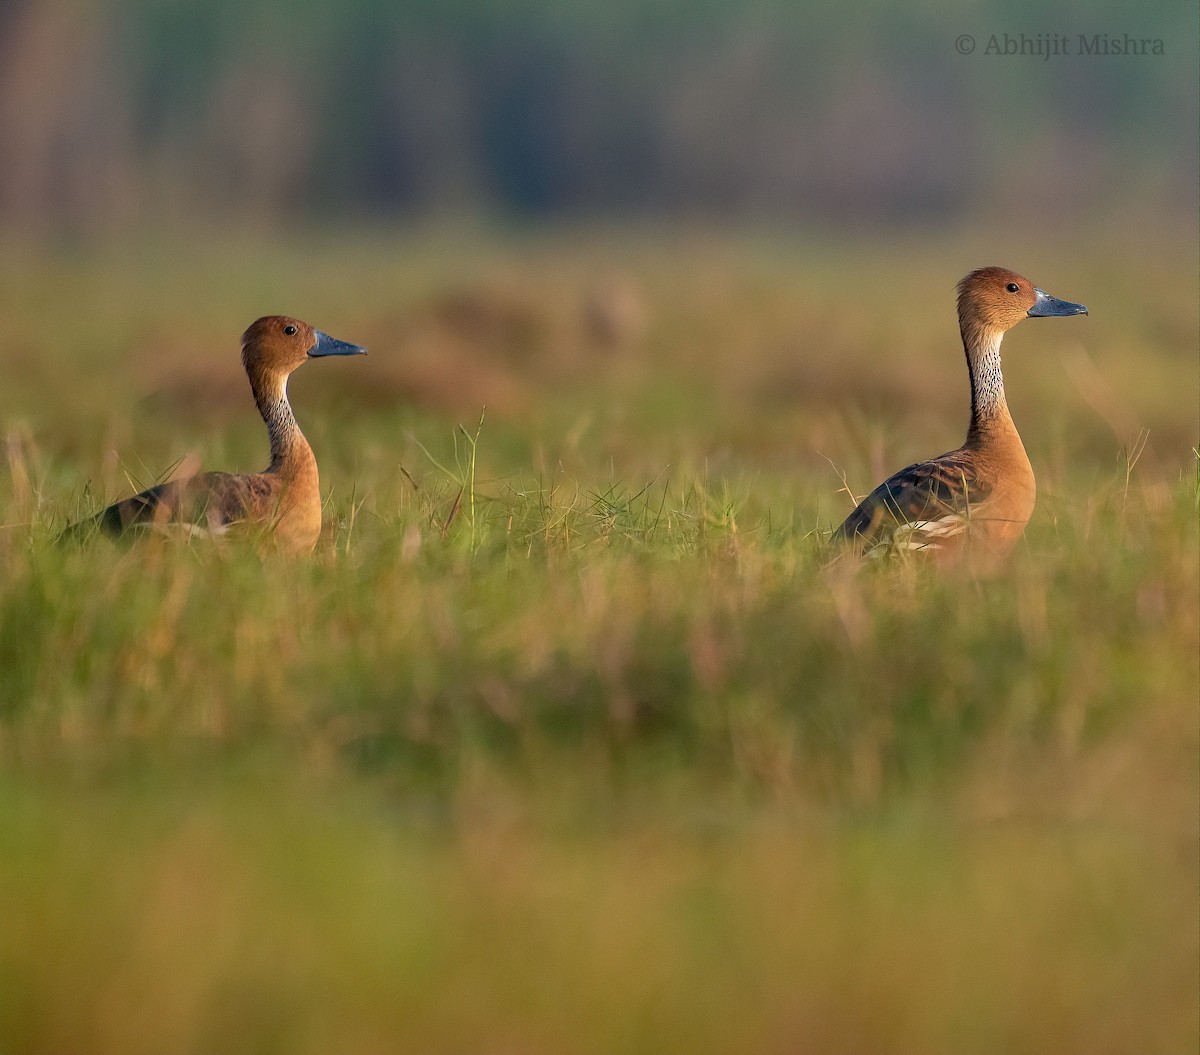 Fulvous Whistling-Duck - Abhijit Mishra